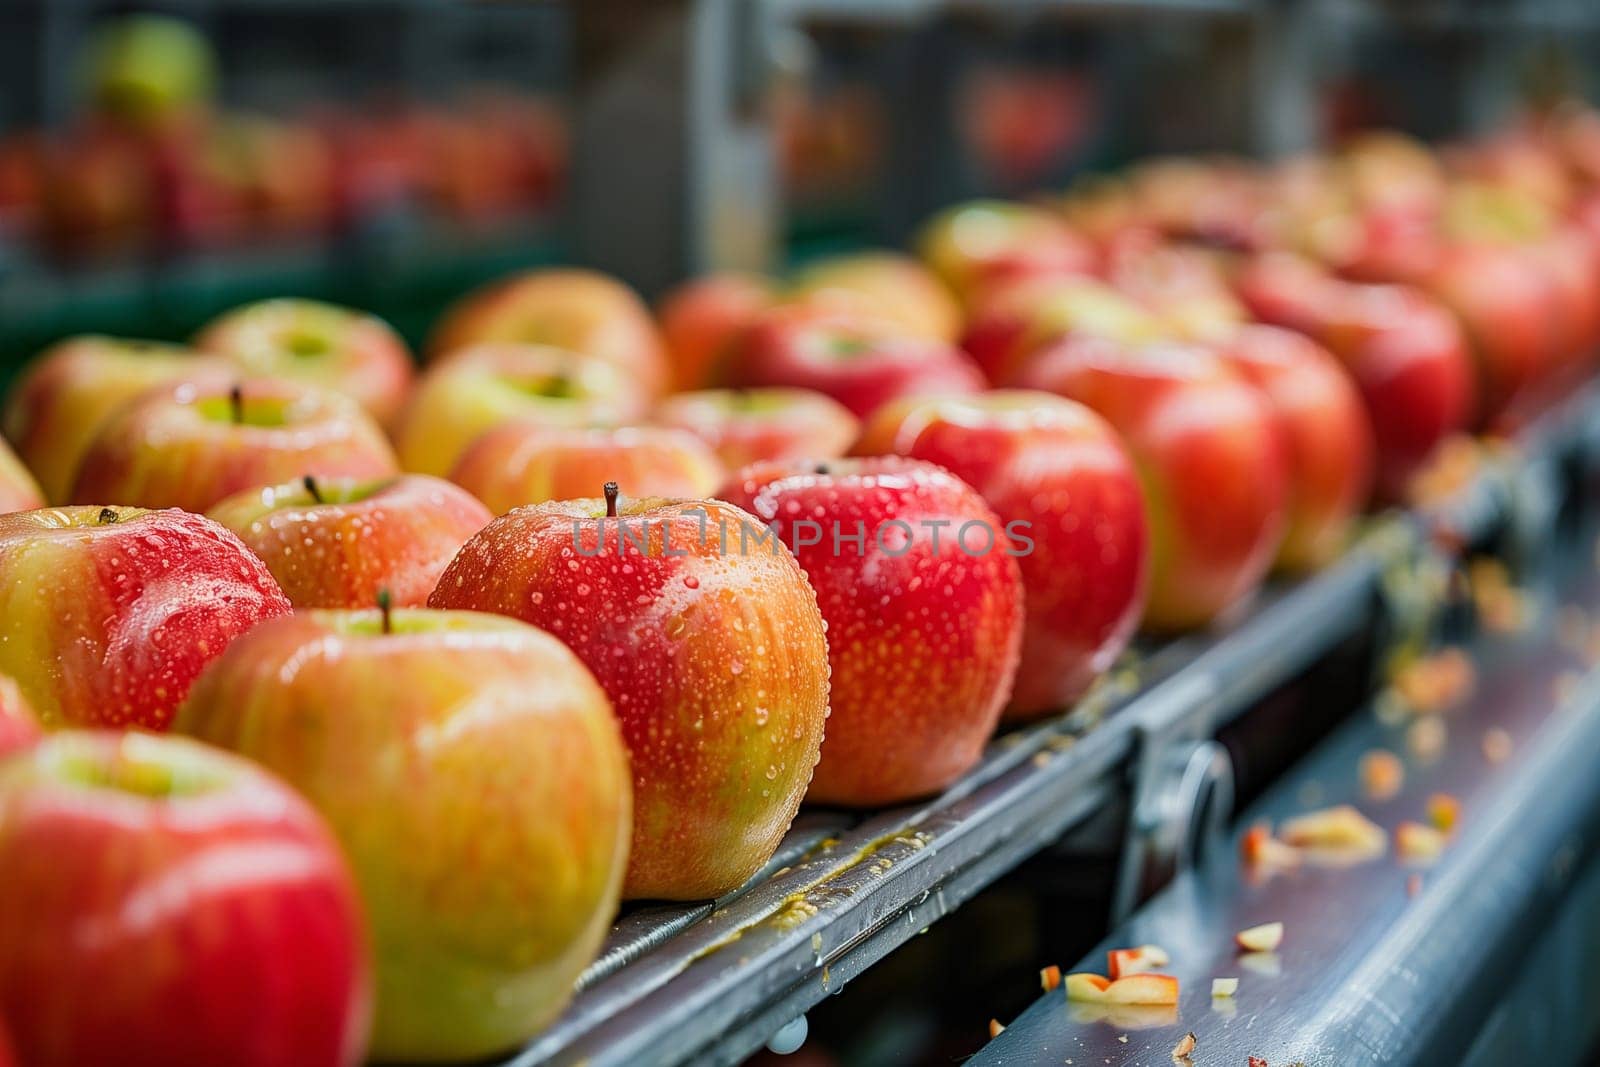 A row of bright red and yellow apples moving along a conveyor belt in a factory or orchard setting.